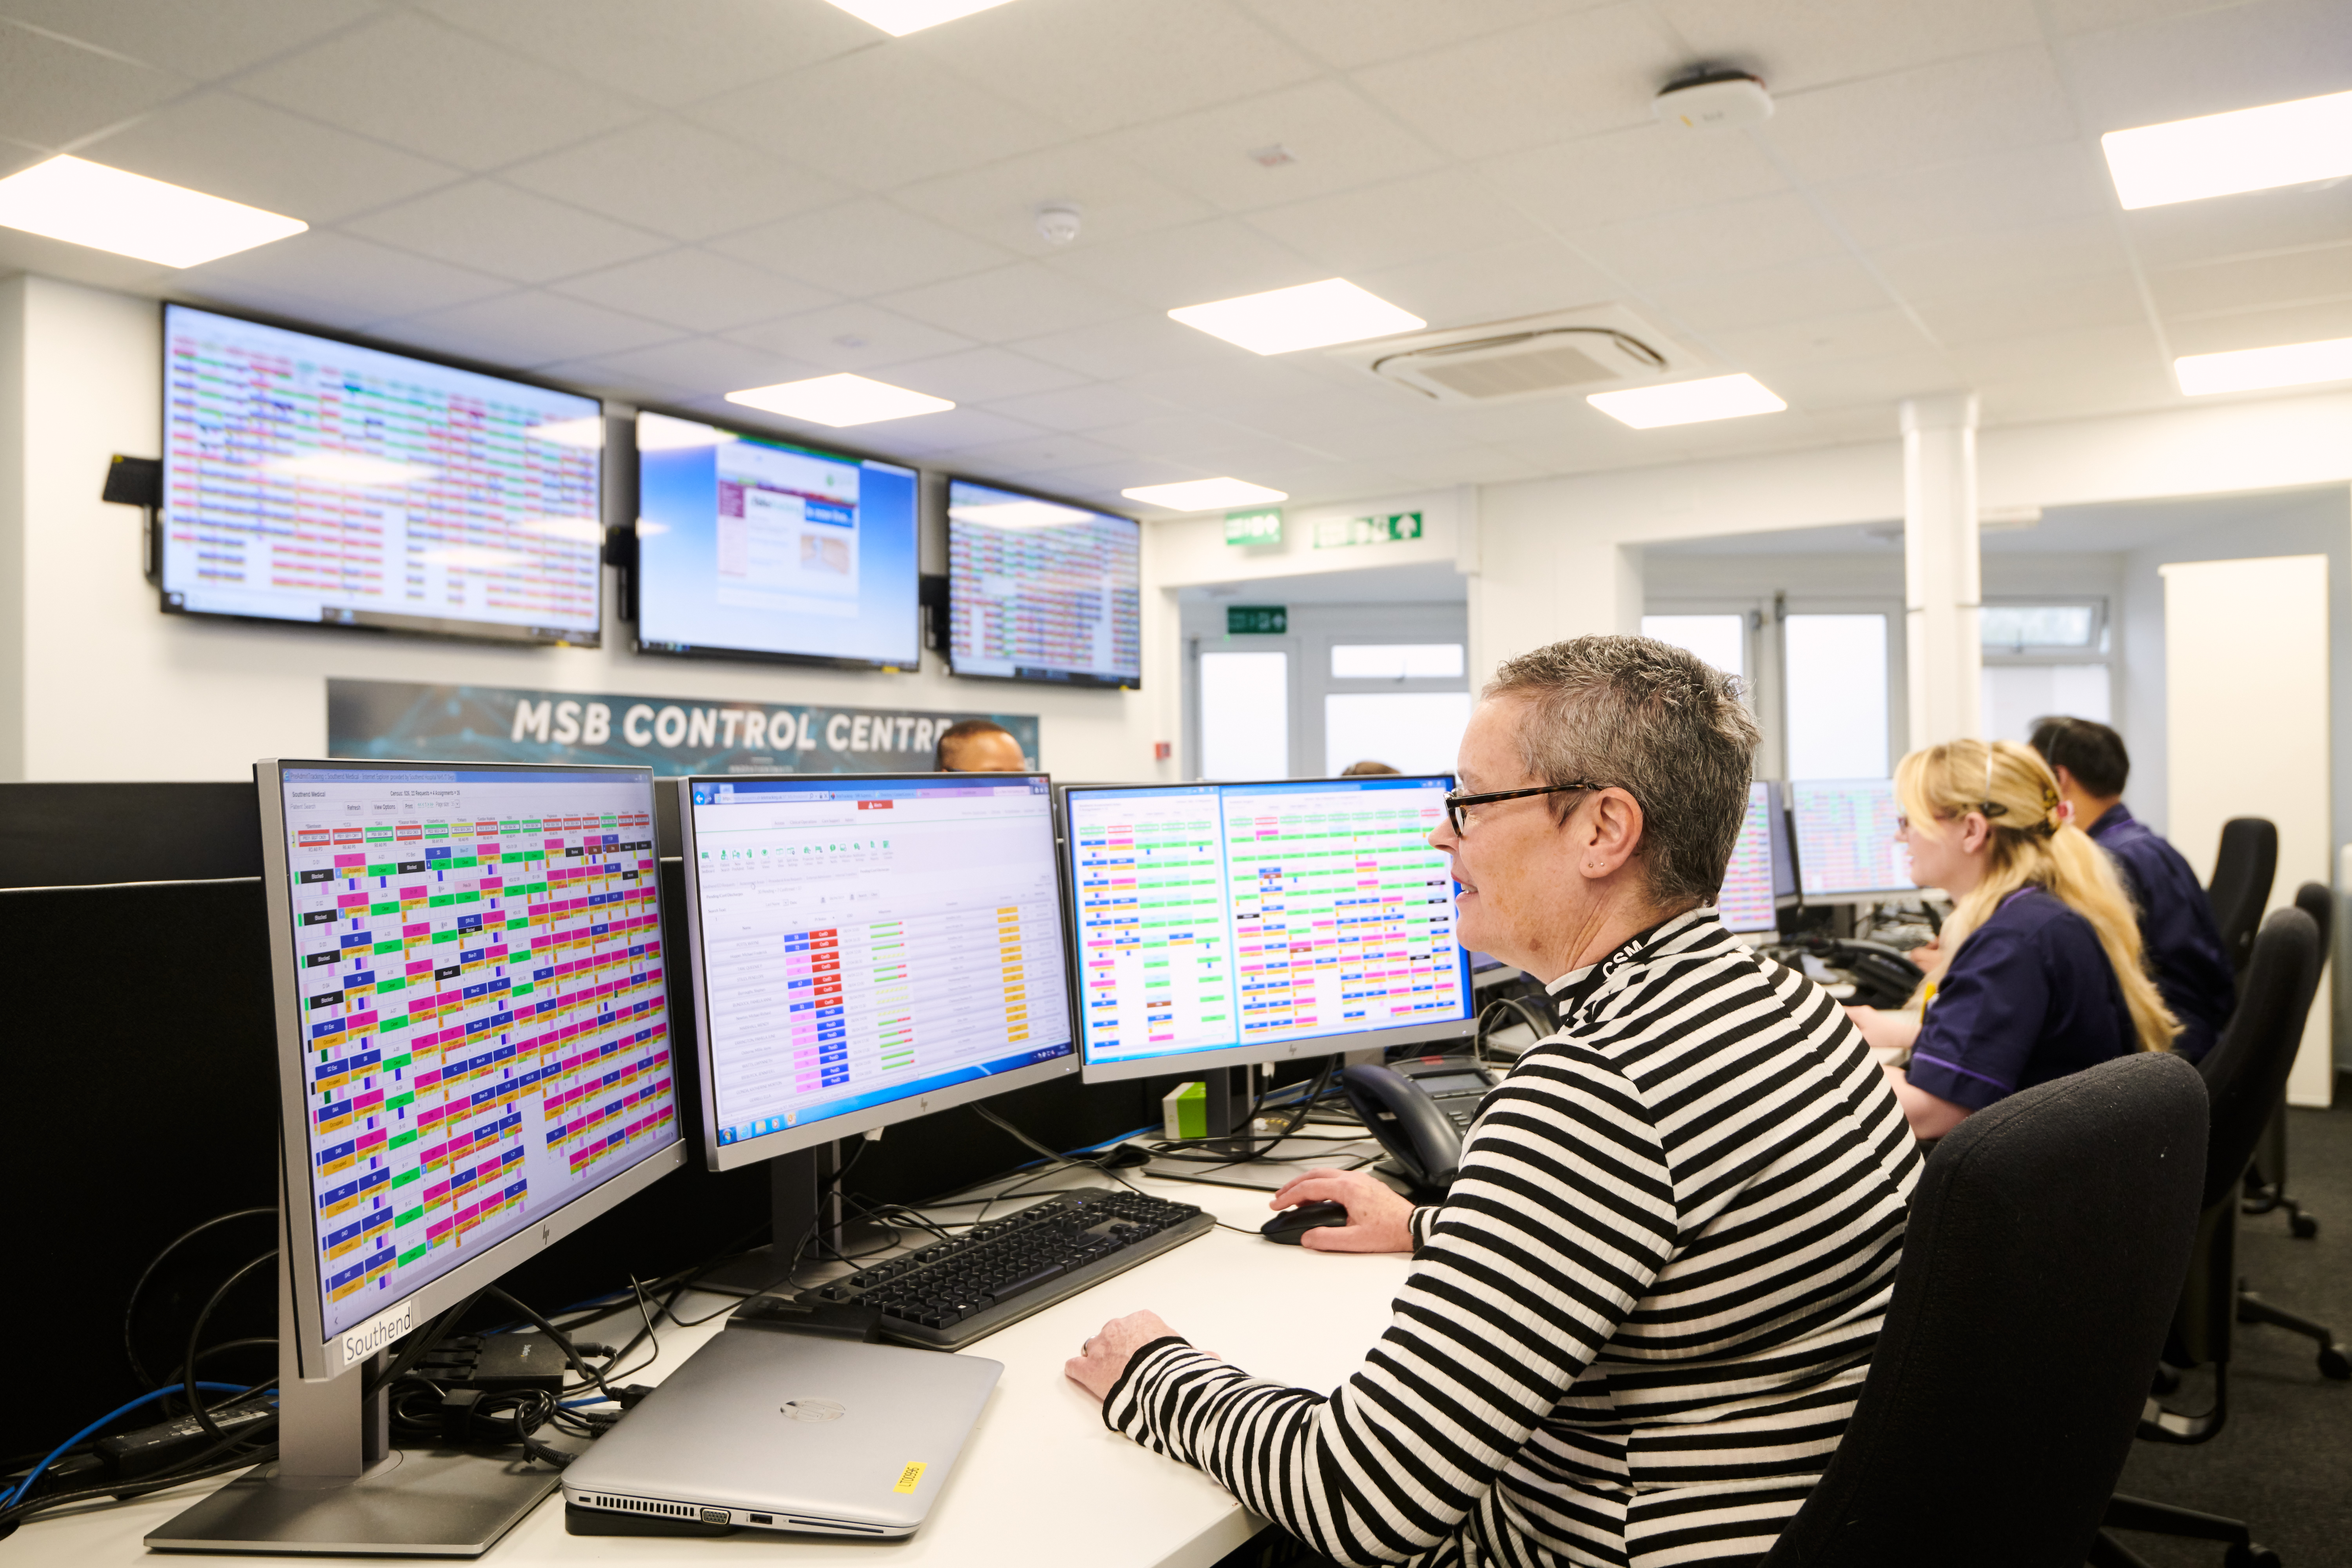 MSB Control Center powered by TeleTracking